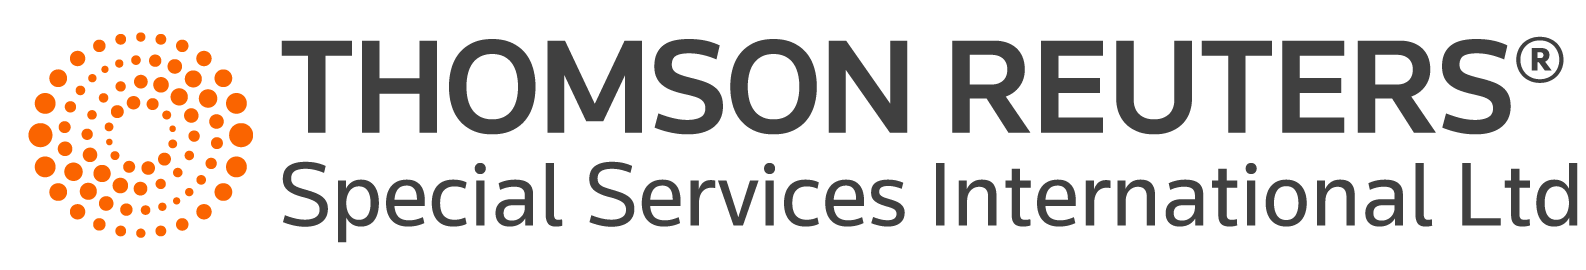 Thomson Reuters Special Services International